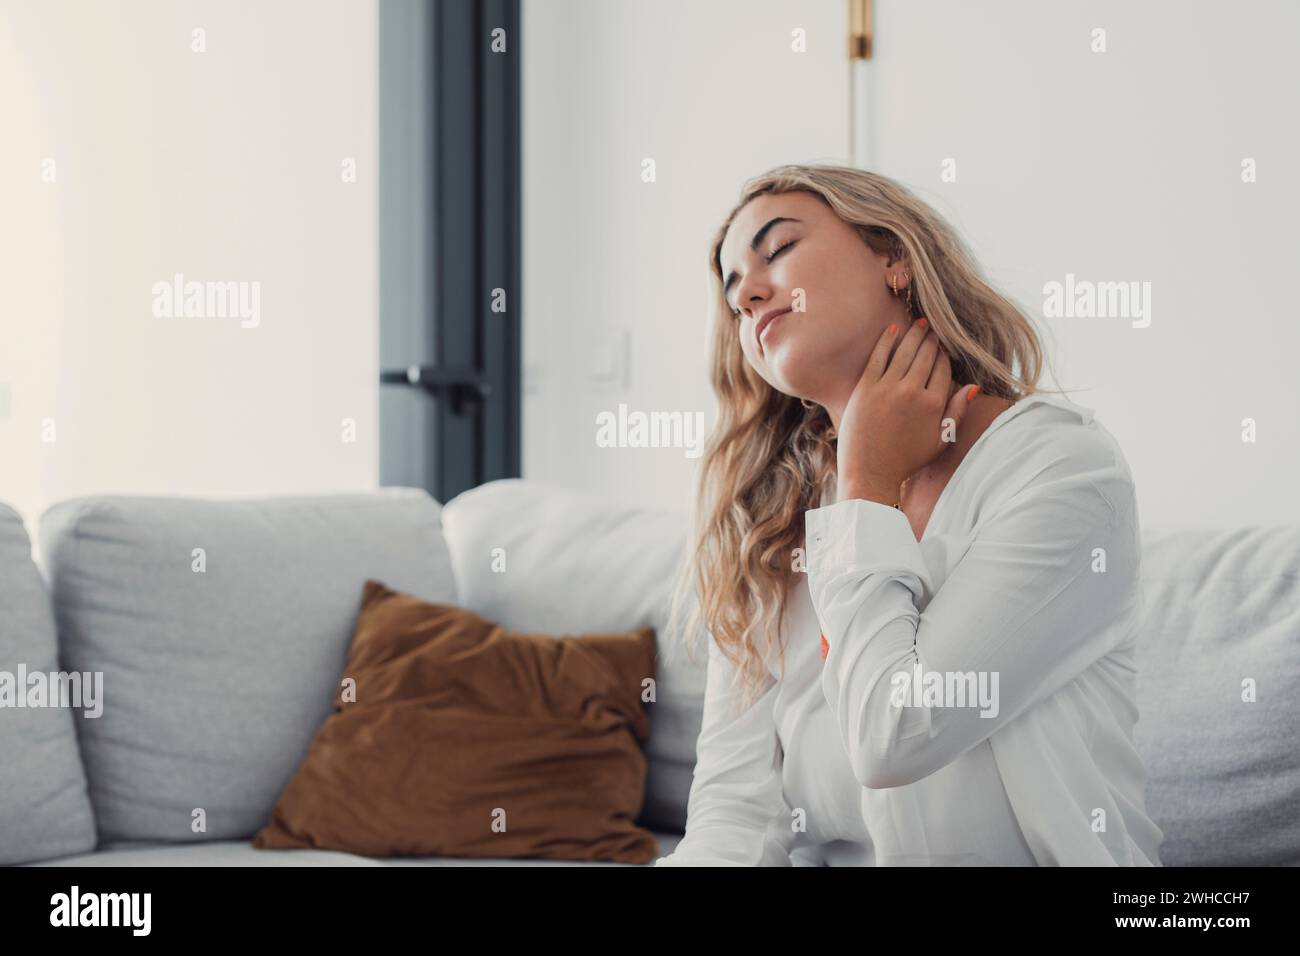 Close up tired woman massaging neck muscles after long sedentary work, exhausted girl feeling discomfort, unwell and unhealthy, suffering from strain or spasm, health problem concept Stock Photo